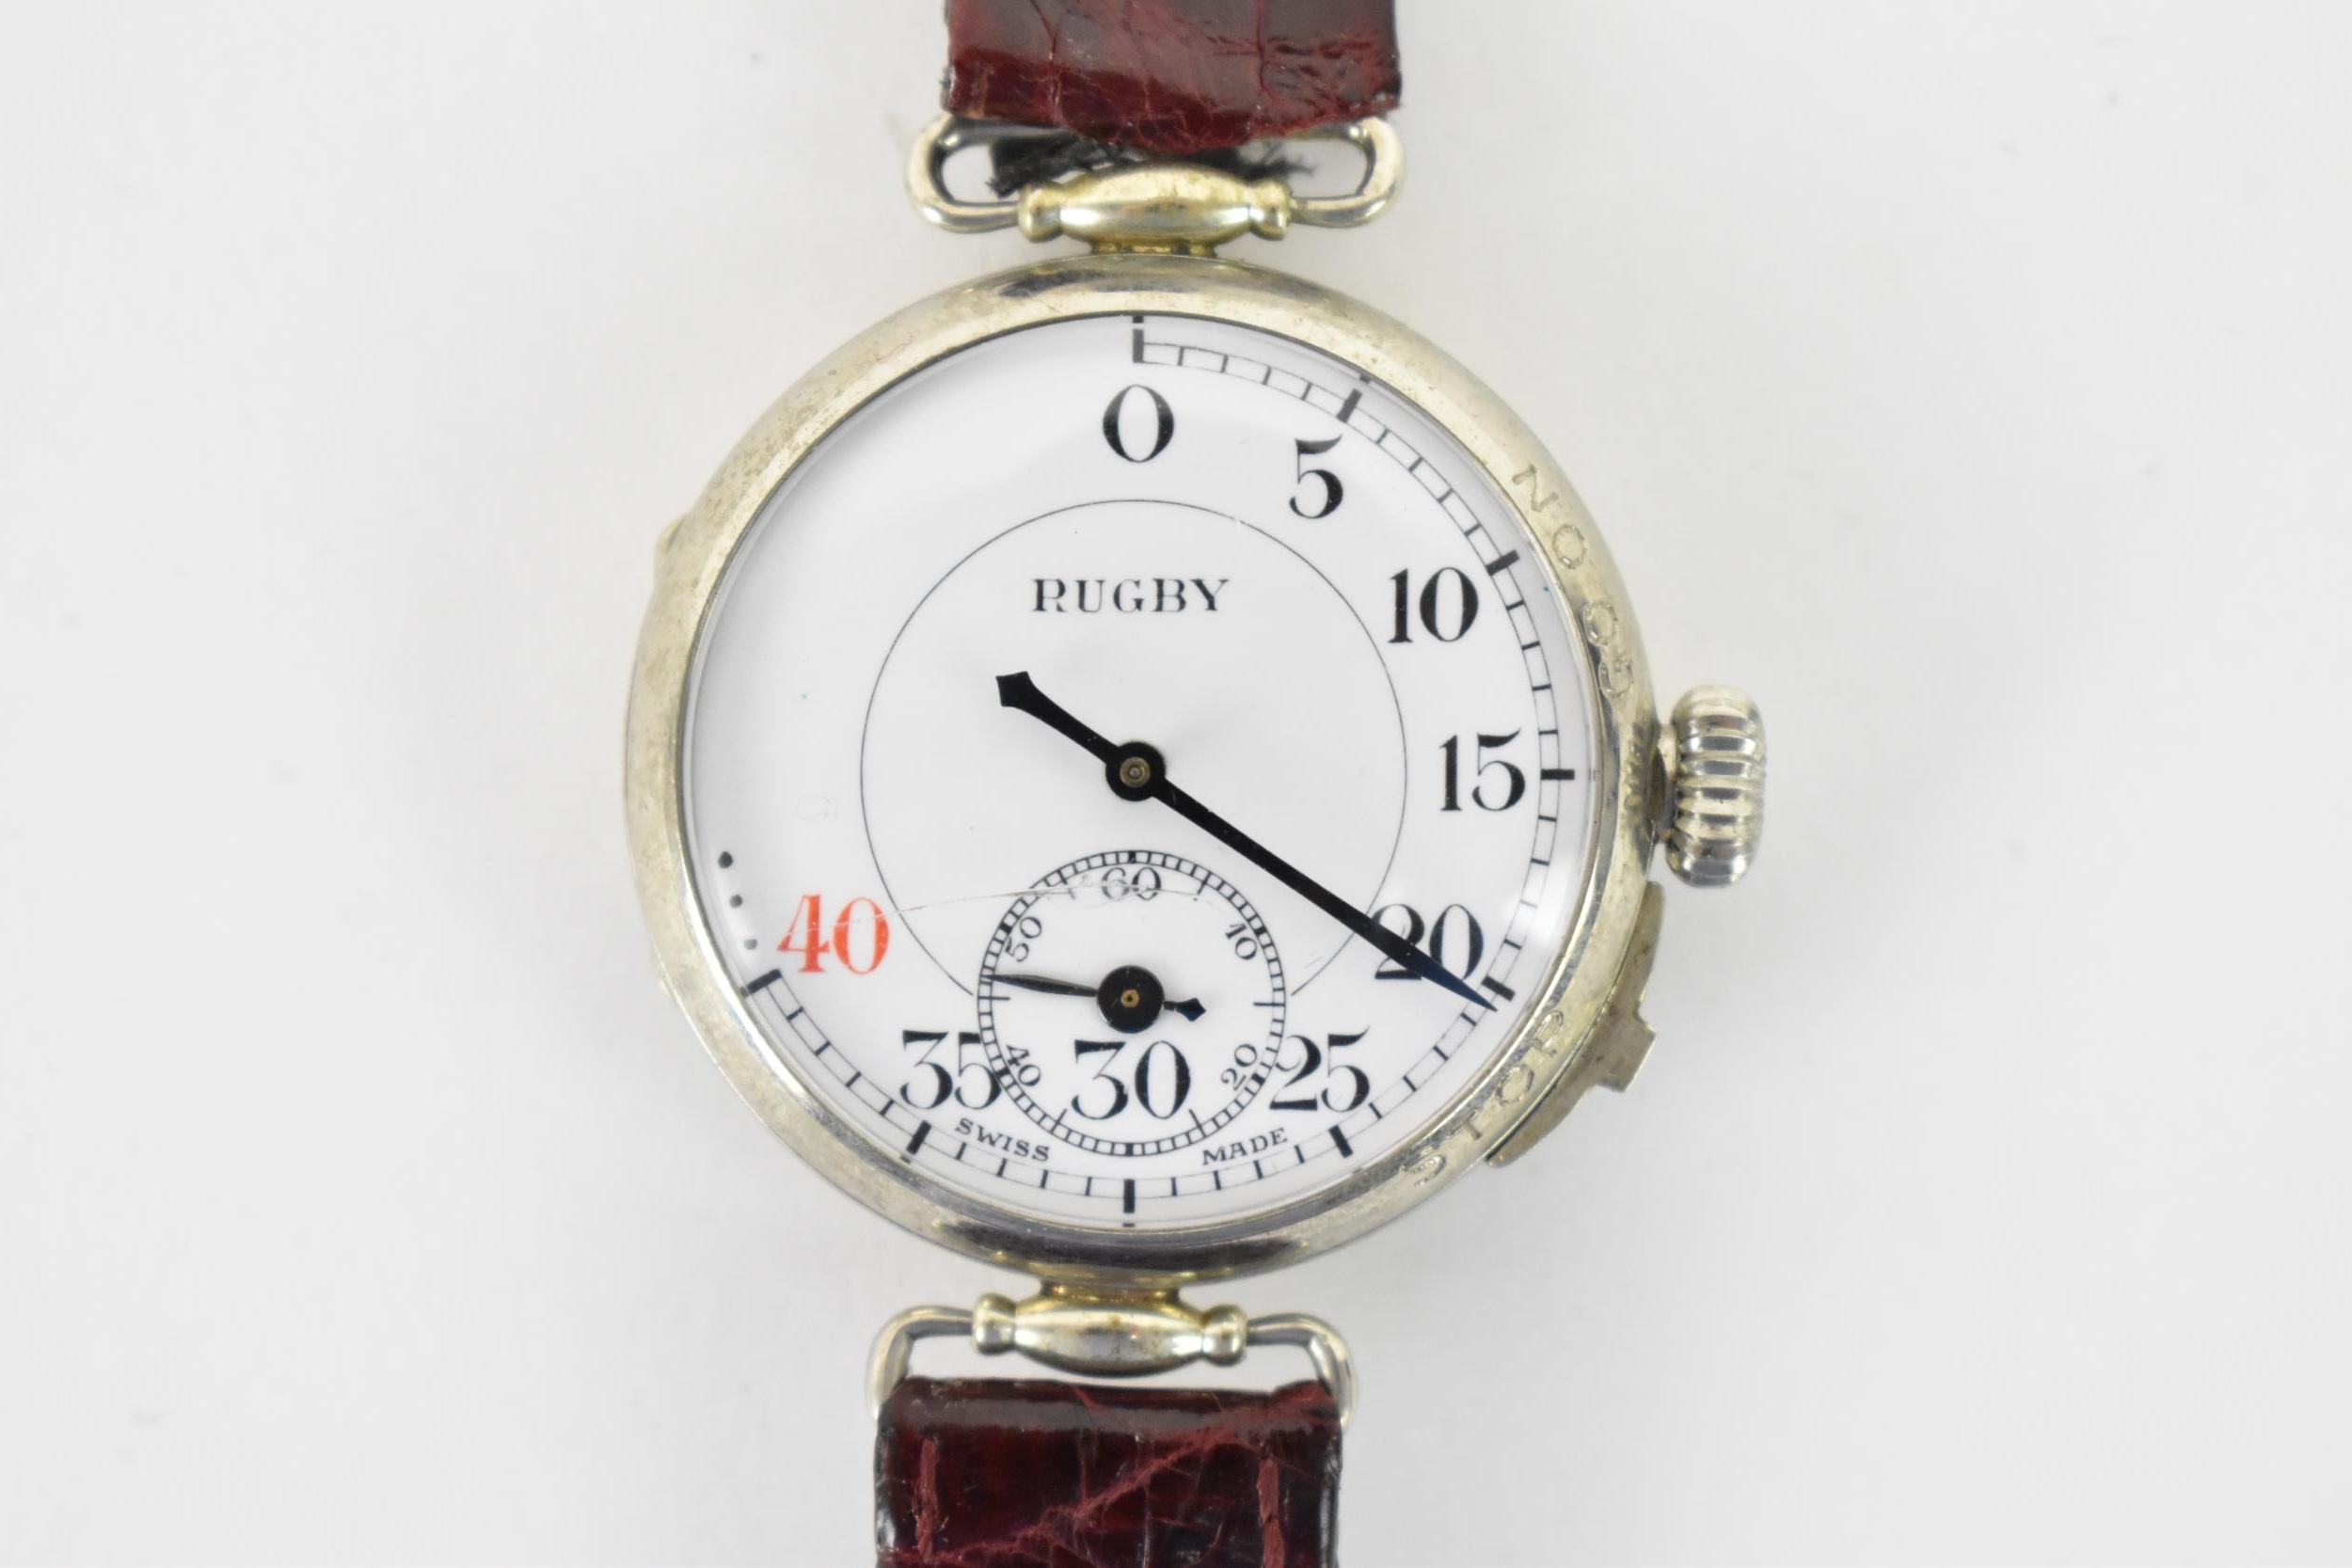 An unusual early 20th century trench style wristwatch to time a game of rugby, the white enamel dial